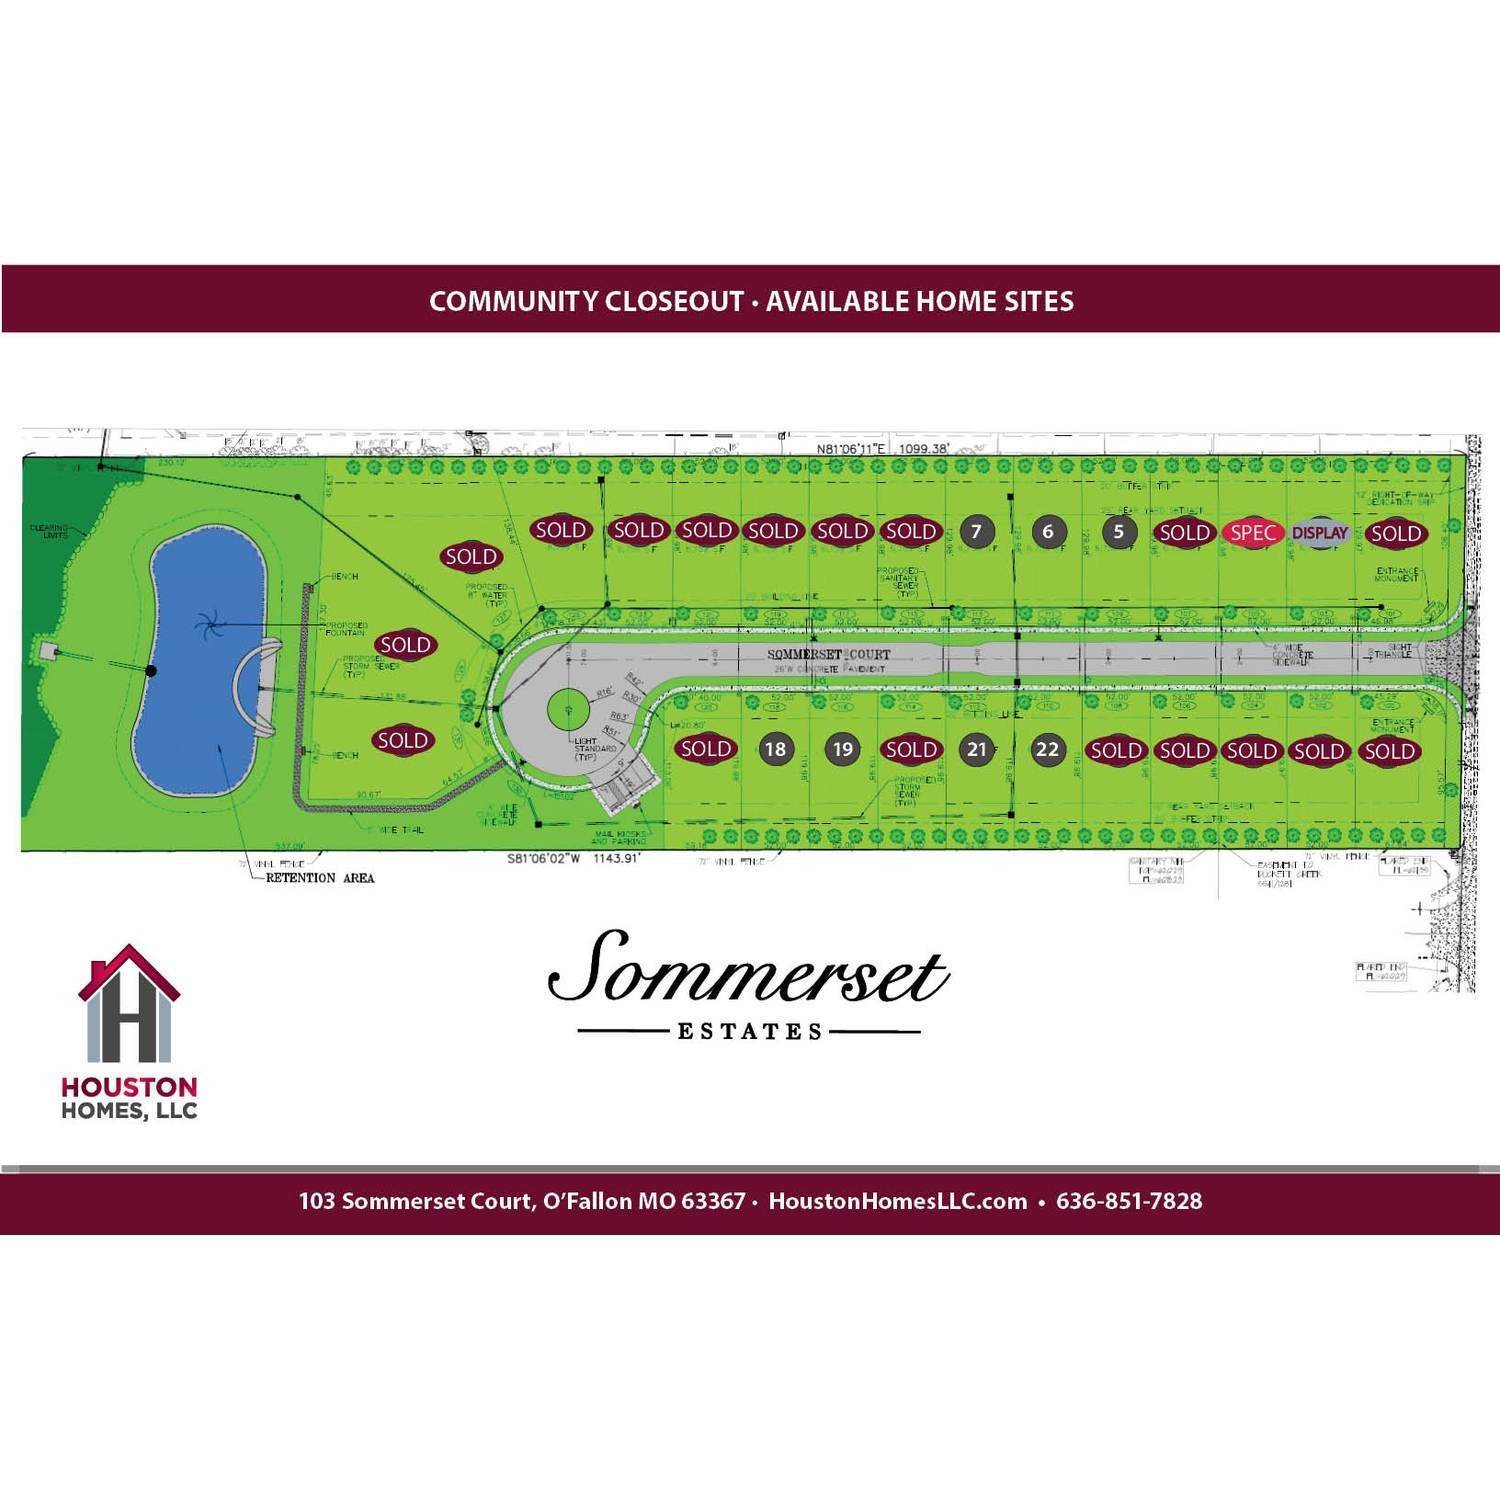 3. Sommerset Estates xây dựng tại 103 Sommerset Ct, O Fallon, MO 63367